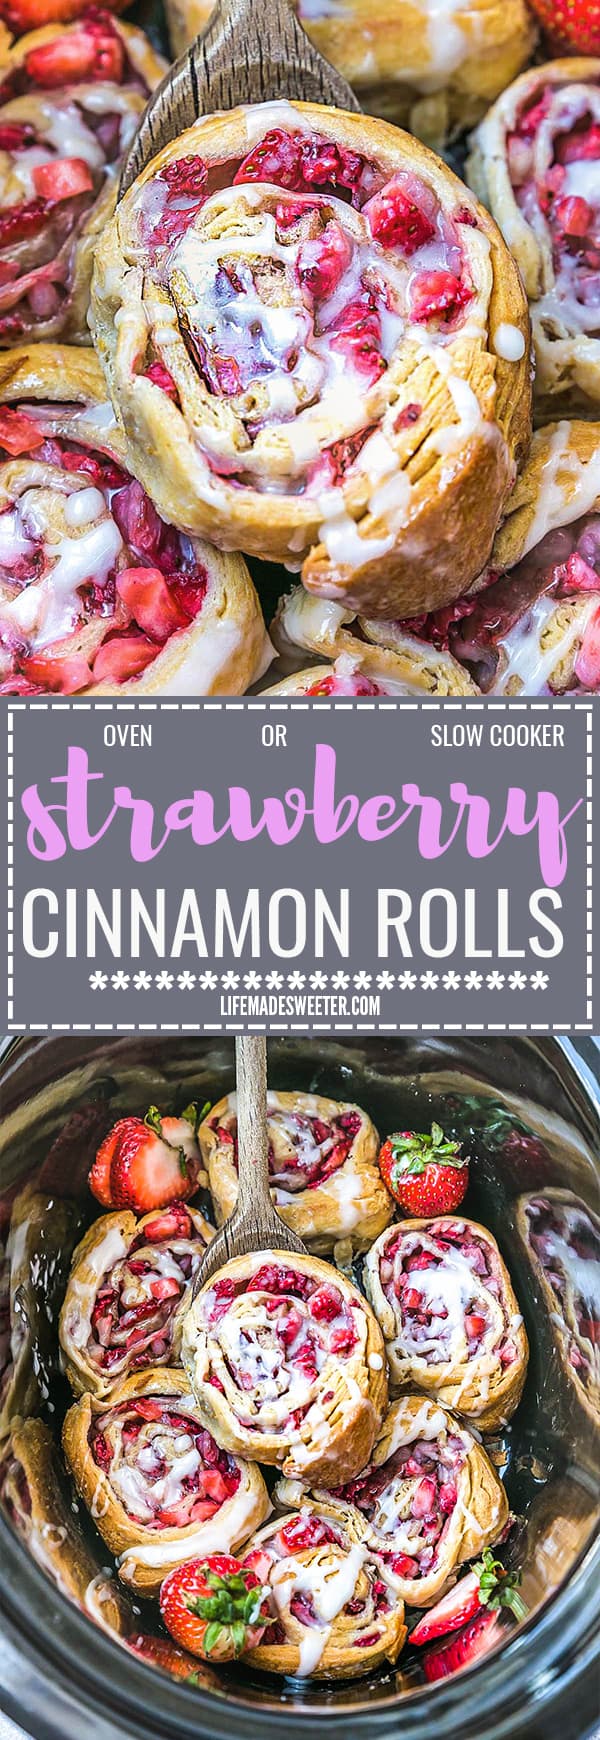 Easy Strawberry Cinnamon Rolls make the perfect indulgent treat for breakfast, brunch or even dessert. Best of all, these effortless rolls take no time at all using Pillsbury crescent roll dough, fresh strawberries and a cinnamon sugar filling. No yeast or rising required!